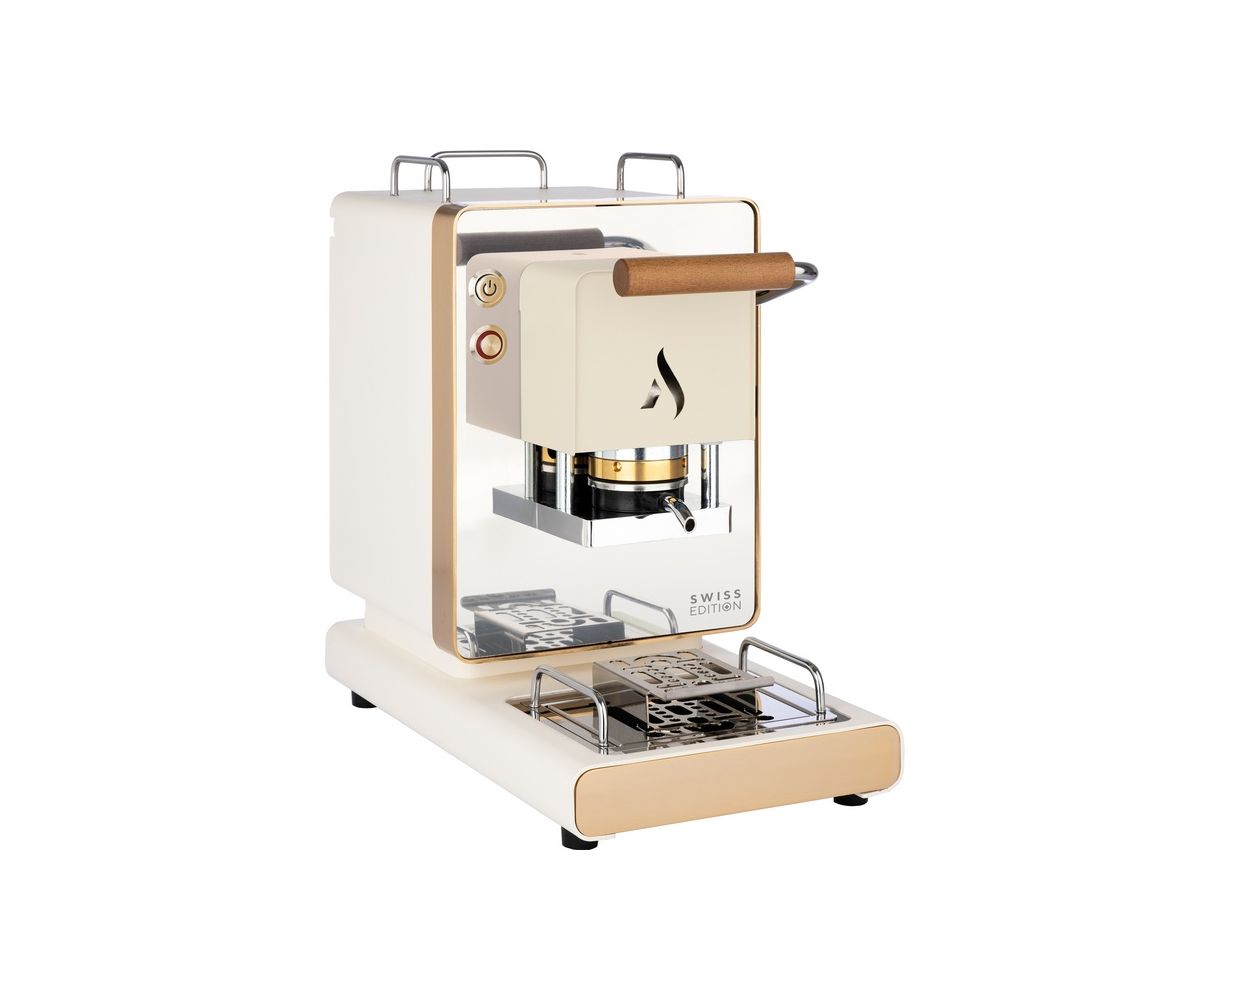 Aroma Iconica Claudia Swiss Edition - white/24k gold